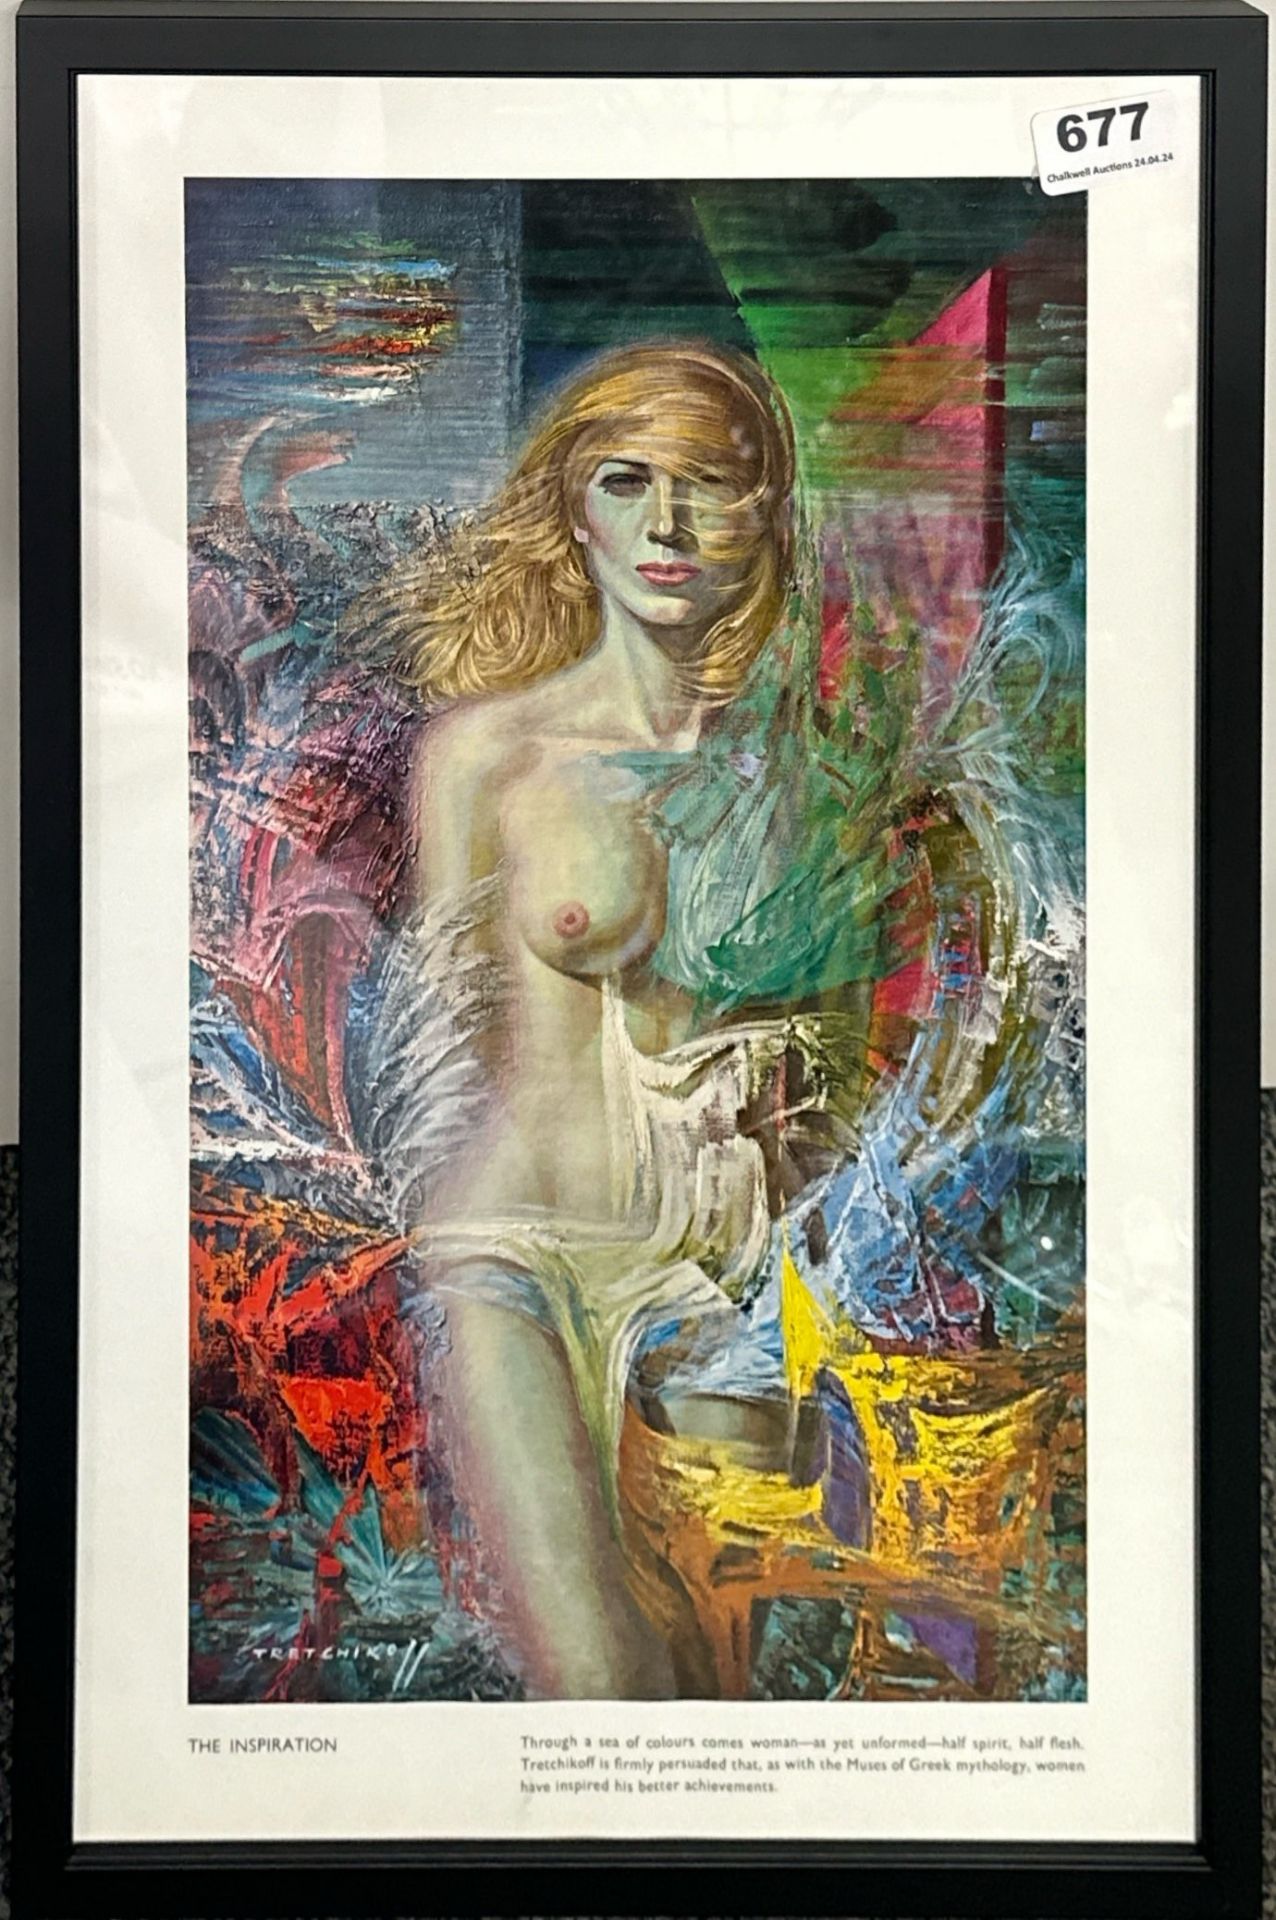 A Tretchikoff framed 1969 lithograph of The inspiration, frame size 32cm x 48cm.